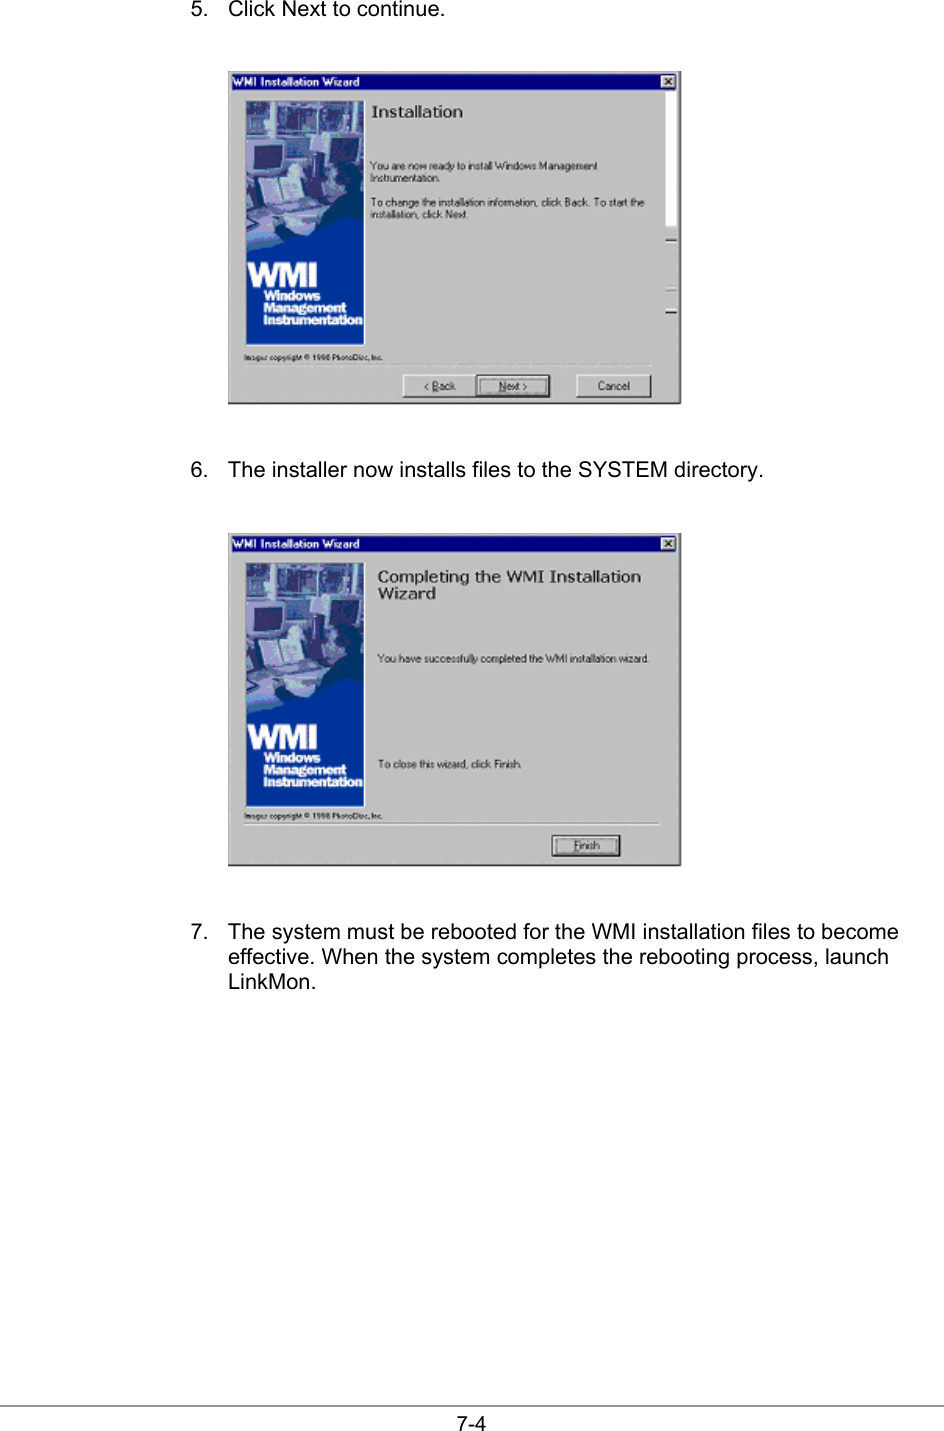  7-4 5.  Click Next to continue.   6.  The installer now installs files to the SYSTEM directory.   7.  The system must be rebooted for the WMI installation files to become effective. When the system completes the rebooting process, launch LinkMon. 